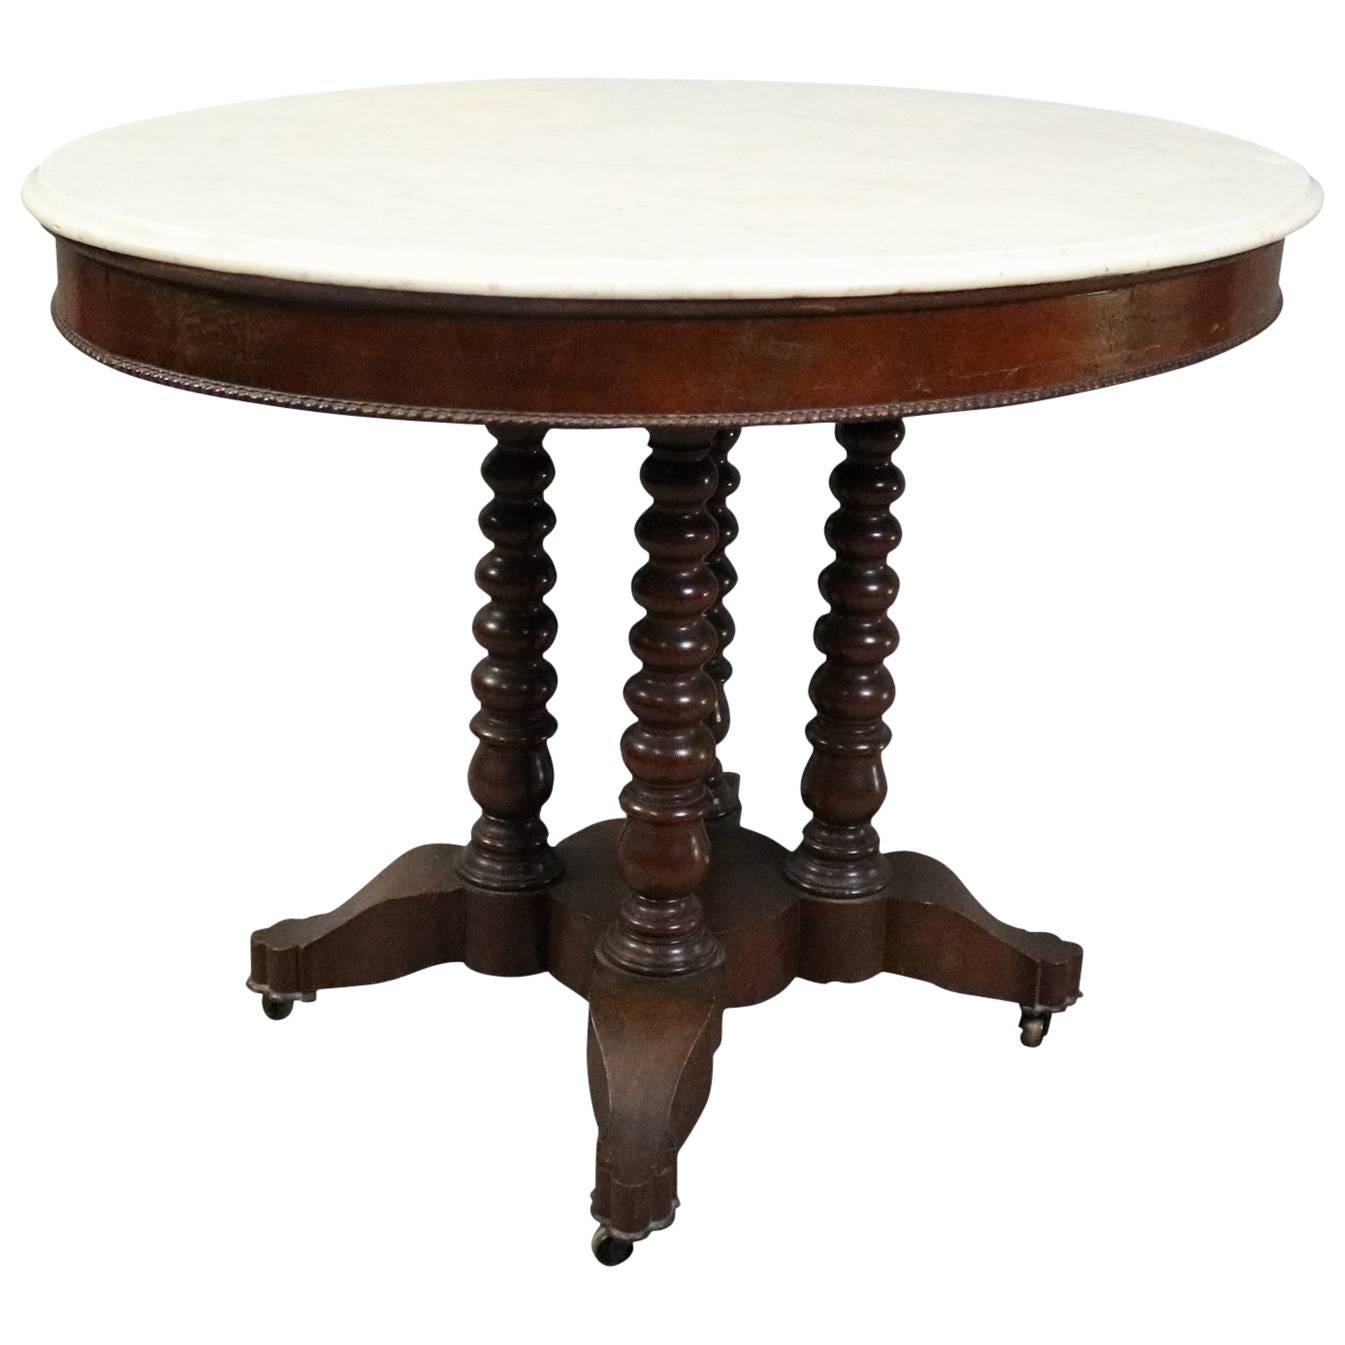 Antique Carved Walnut and Marble Oval Parlor Lamp Table, circa 1880